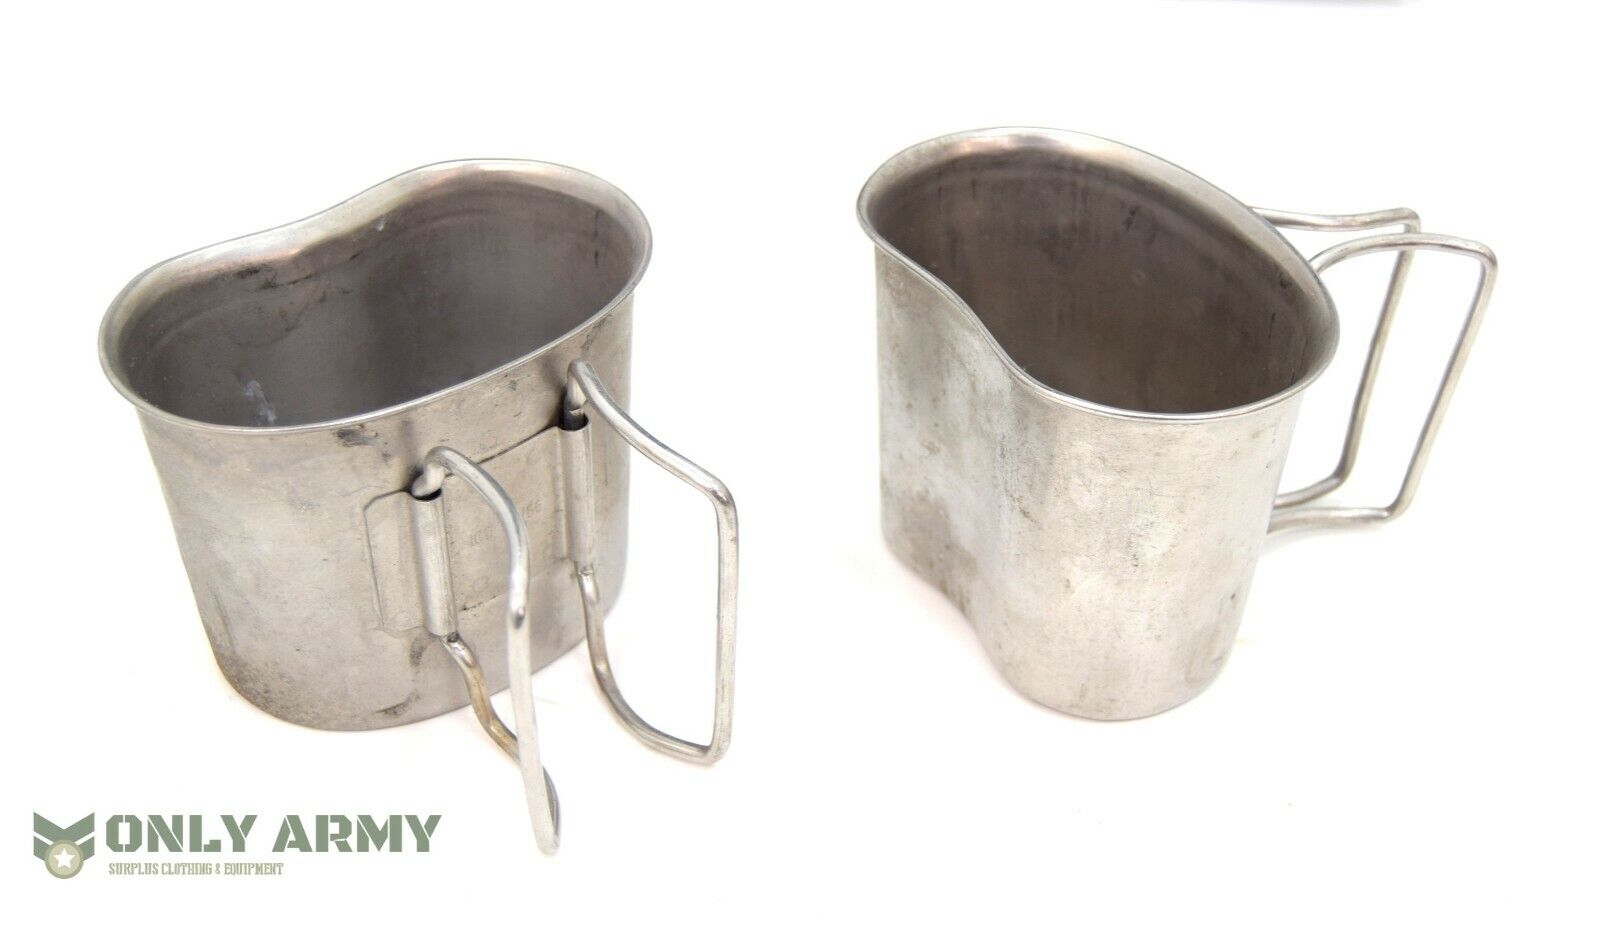 Dutch Army Stainless Steel Cooking Mug Cup Metal Cooking Open Fire Boiling Cups